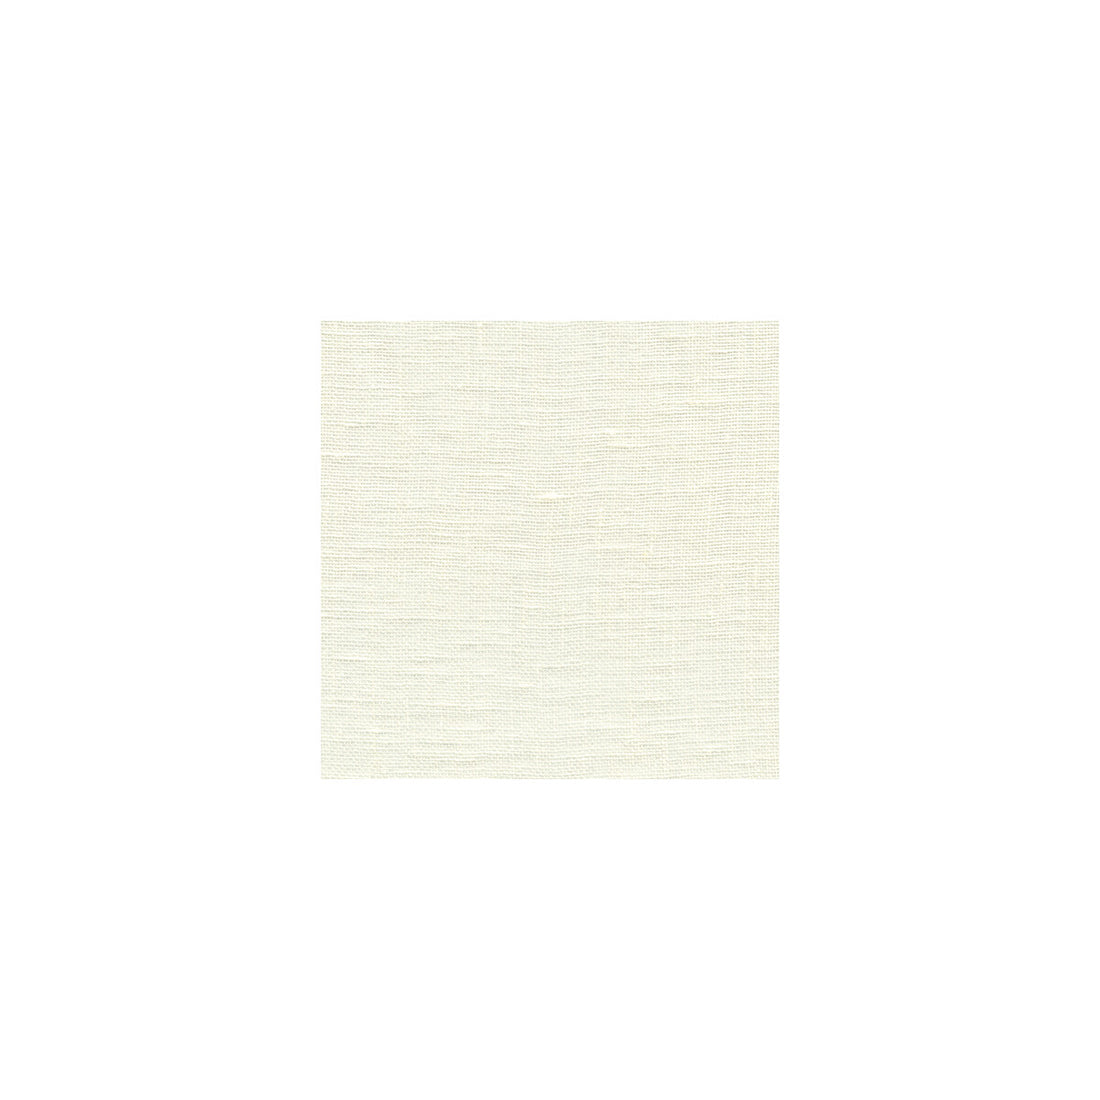 Barra fabric in white color - pattern PF50226.100.0 - by Baker Lifestyle